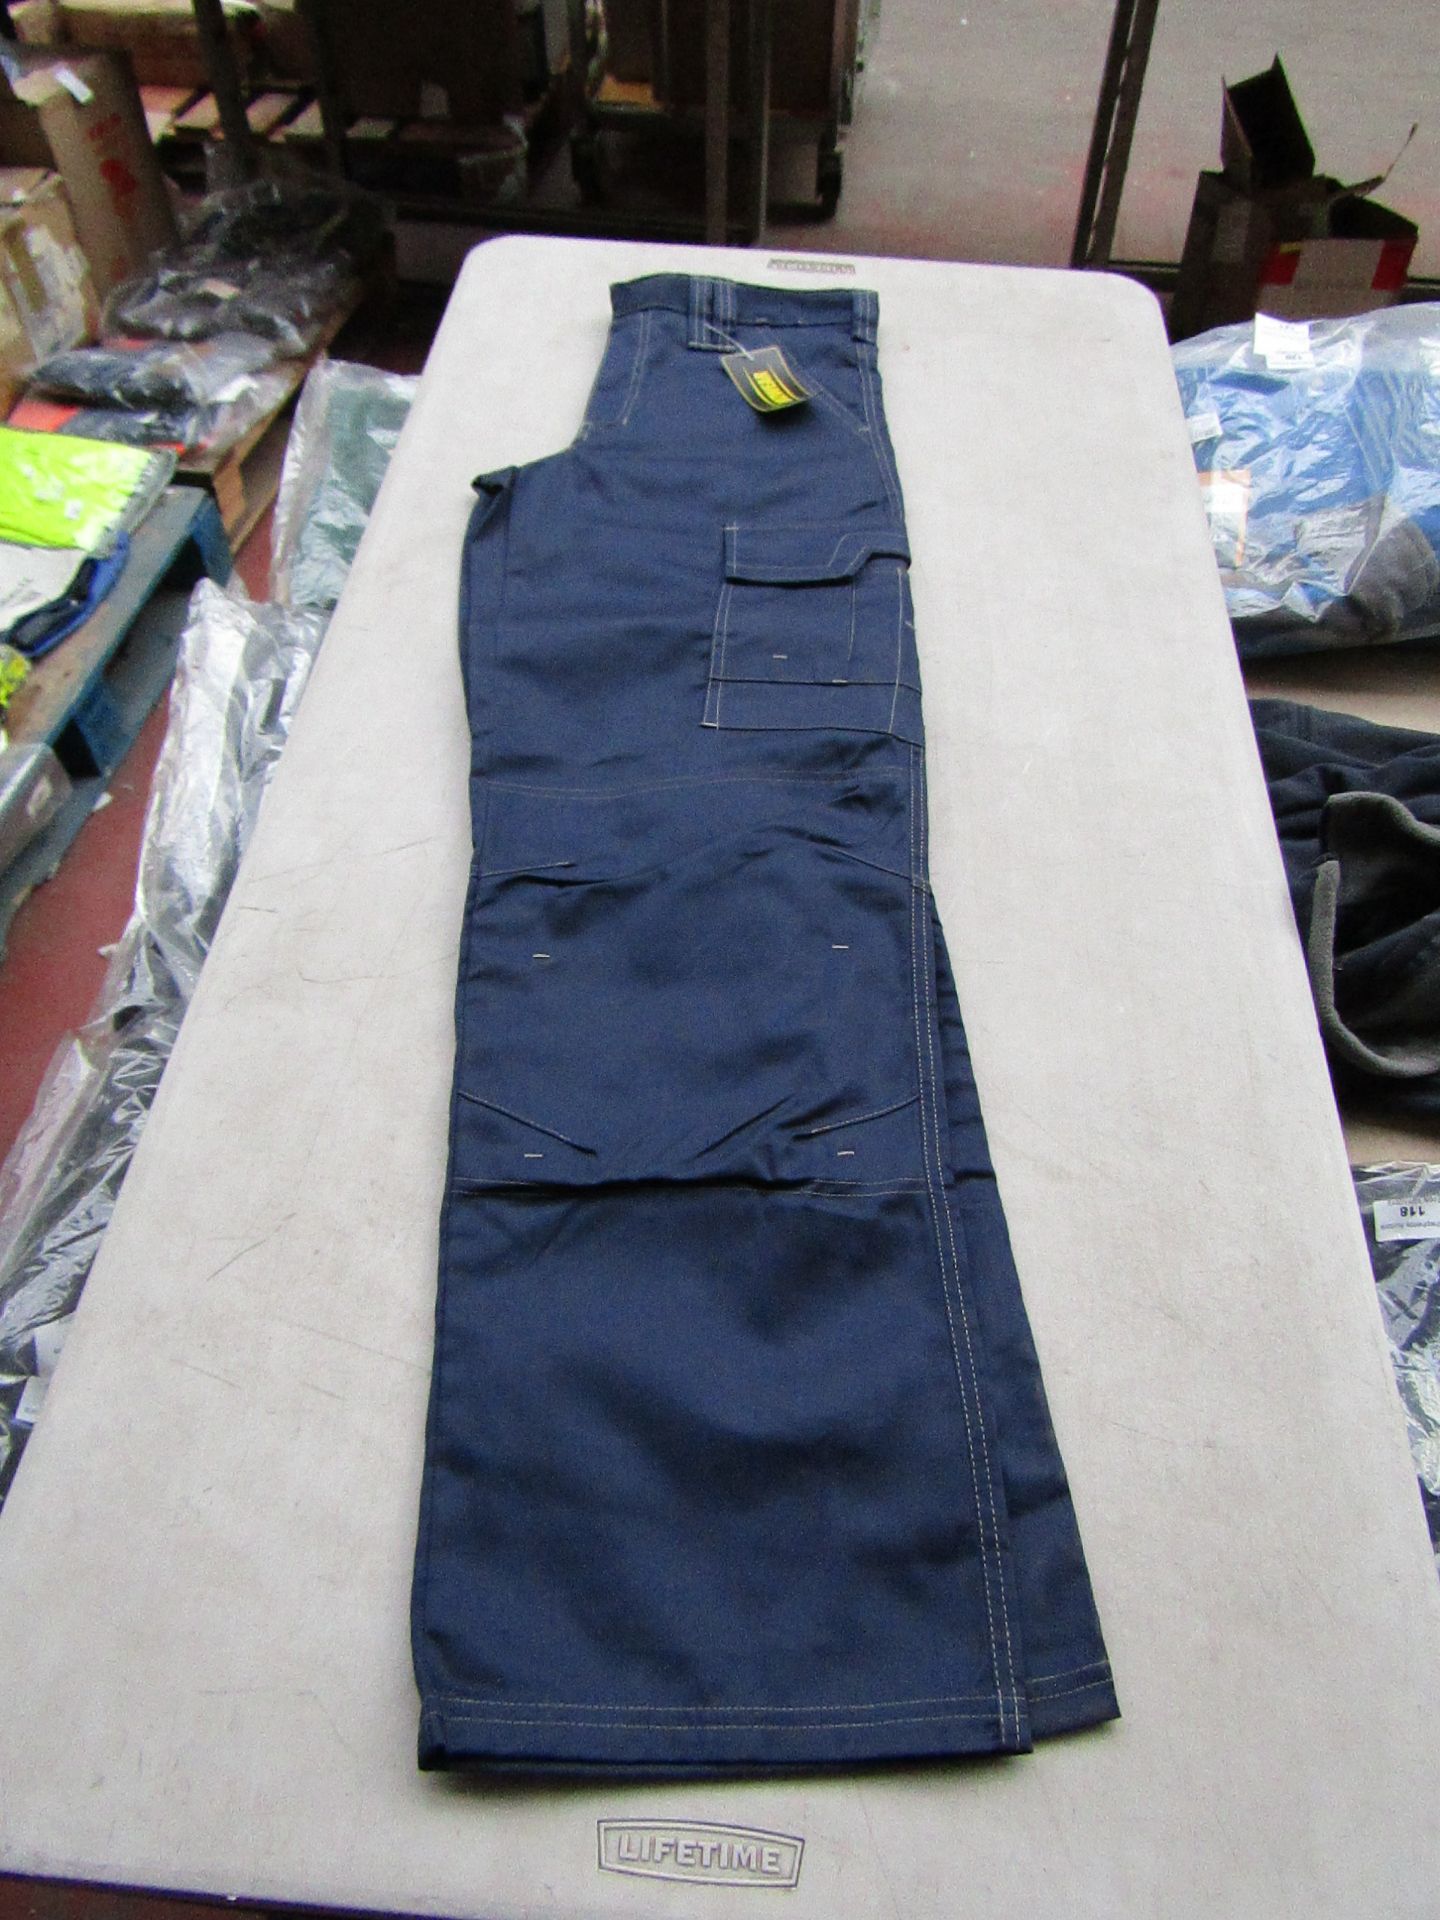 2 x Vizwear action line trousers, size 42R, new and packaged.